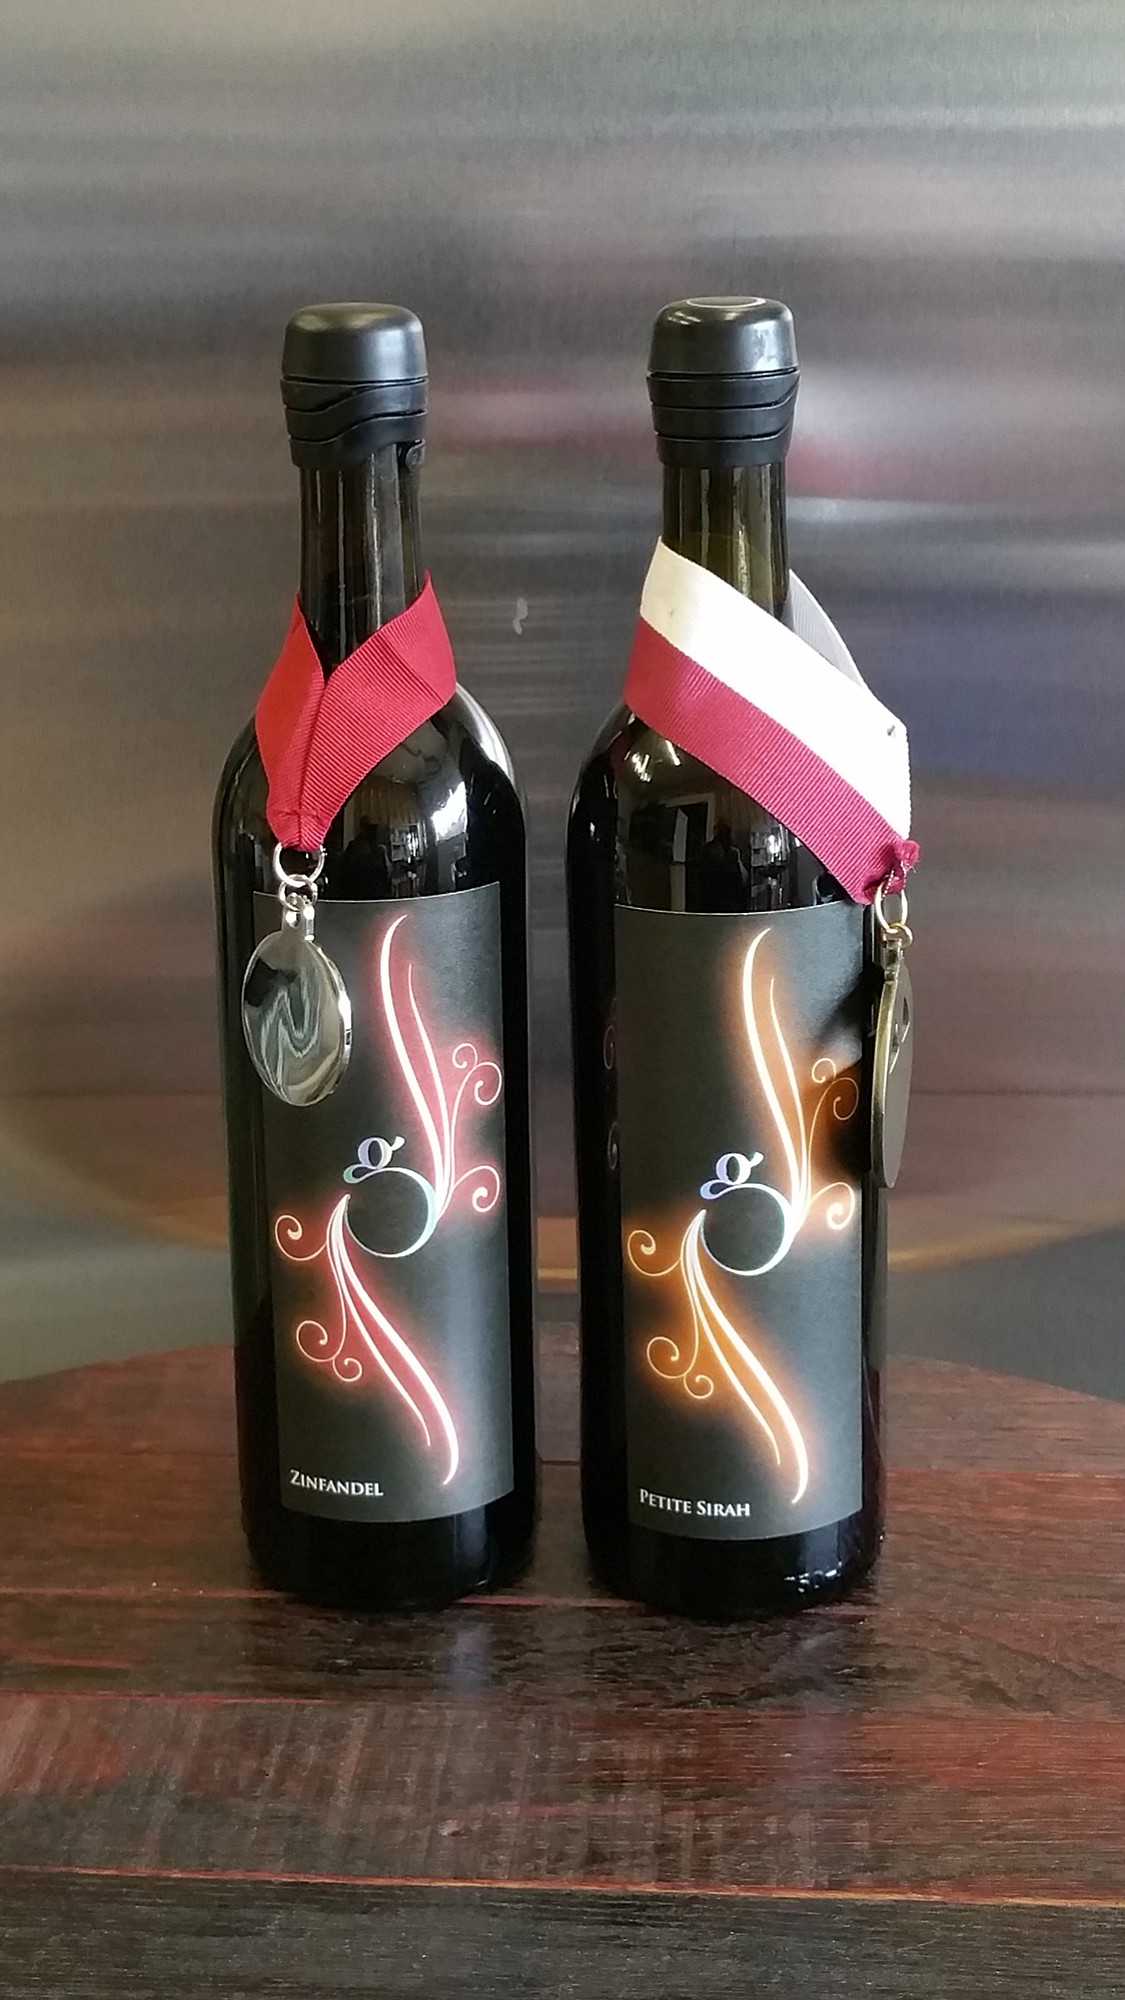 Ridgefield: Gouger Cellars' 2011 zinfandel and 2010 petite sirah both won awards at this year's San Diego International Wine Competition.